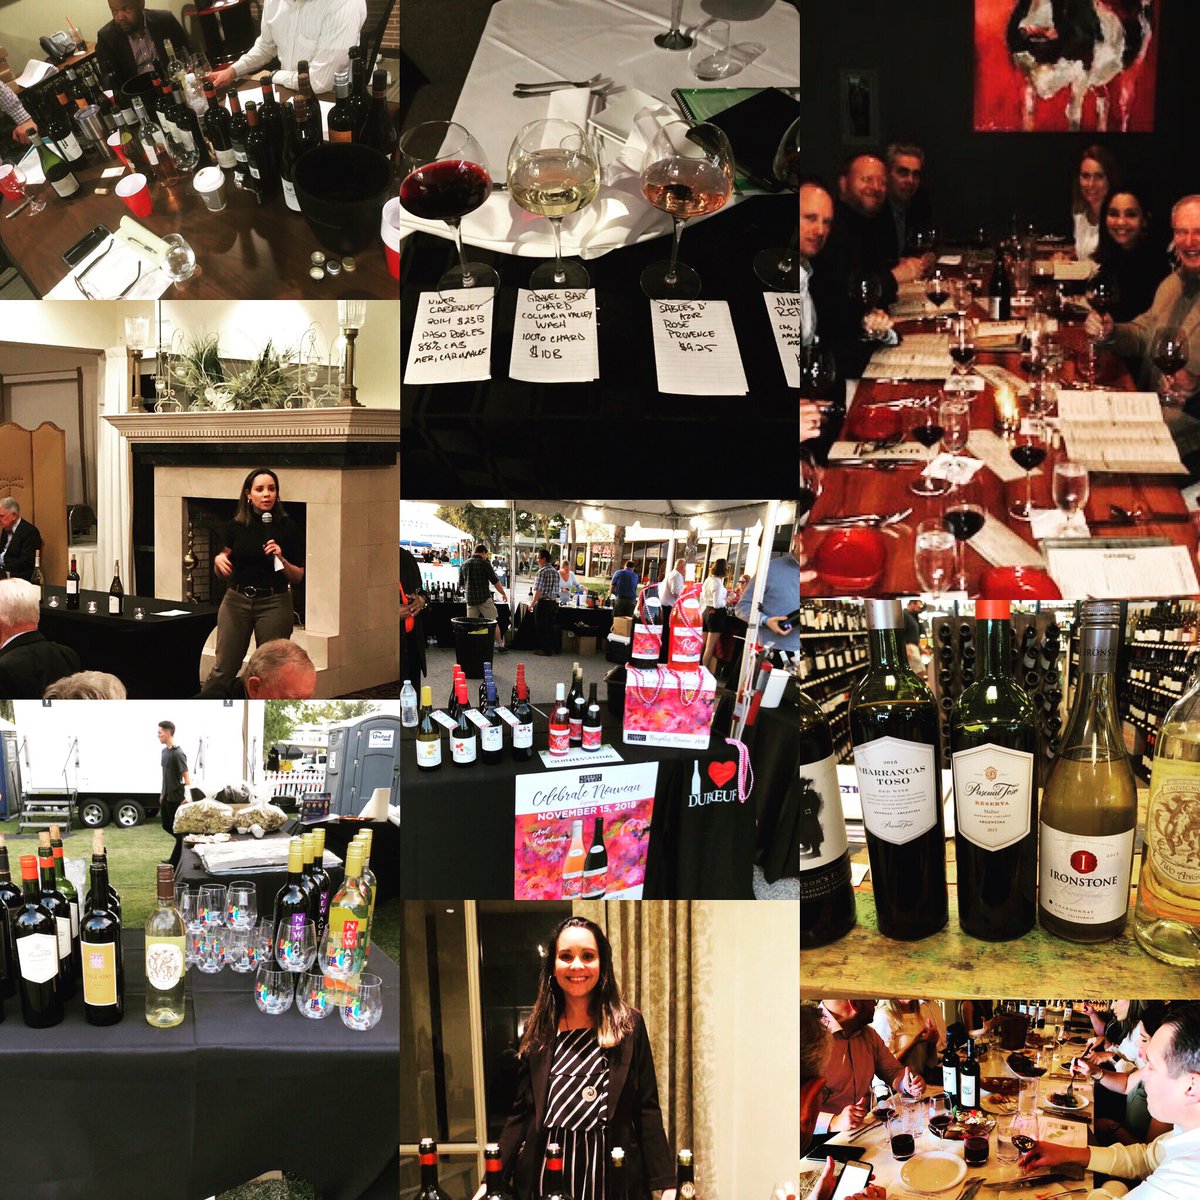 Thank you to each bottle poured, featured and drank in #2018. Ready for #2019 selection! #winejob #winetasting #ilovewhatido @QuintWines @PascualToso @GeorgesDuboeuf